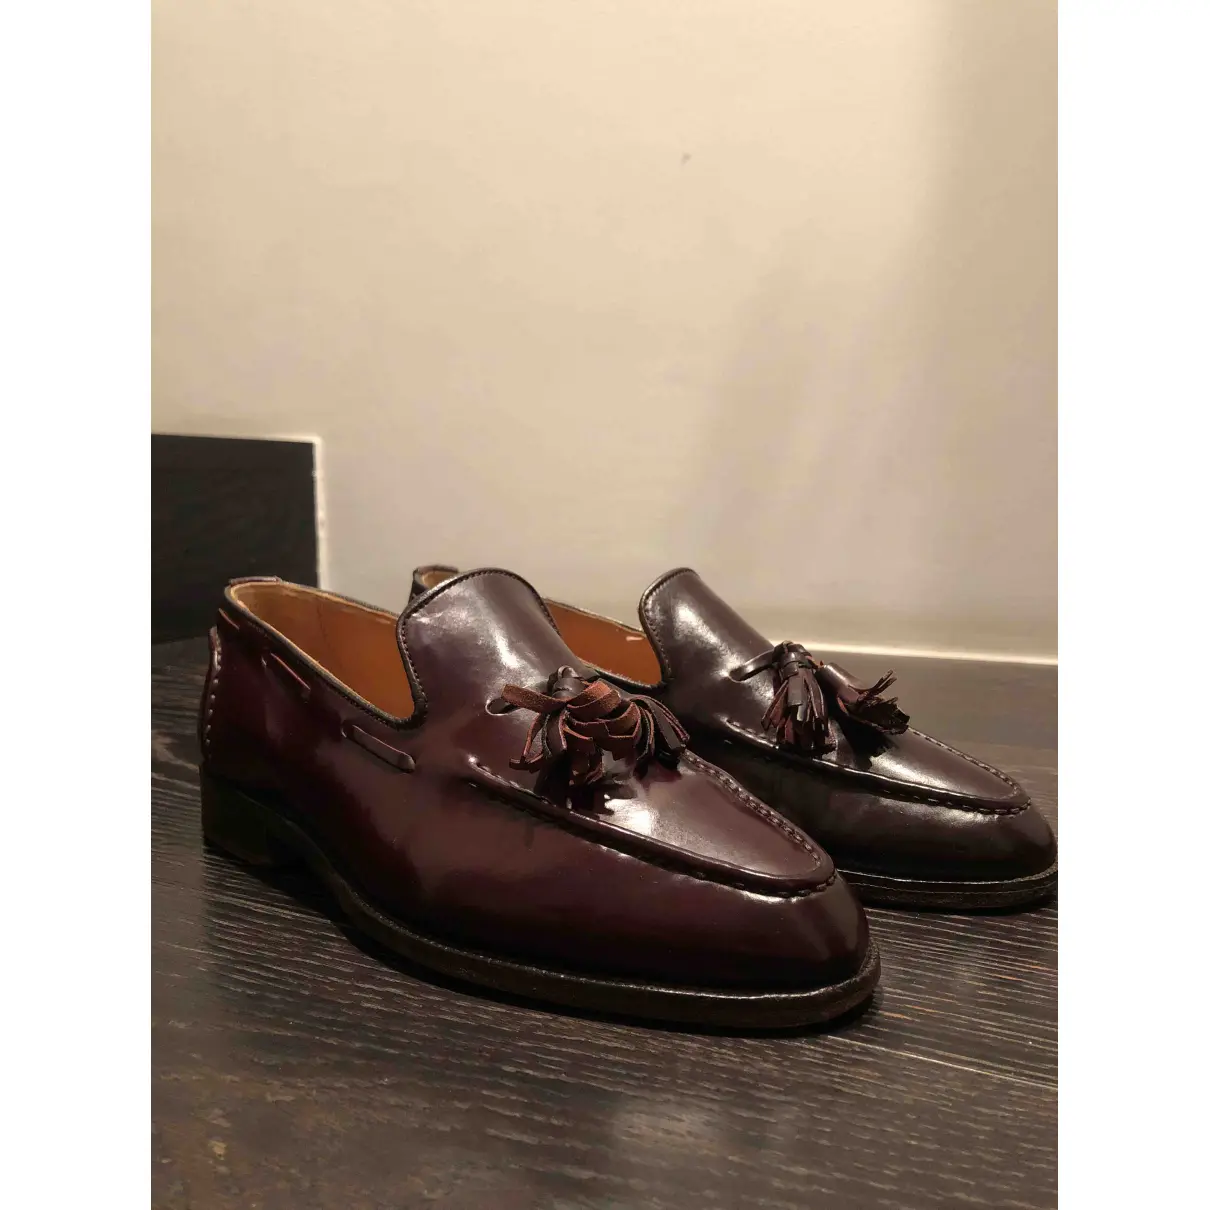 Buy Trickers London Leather flats online